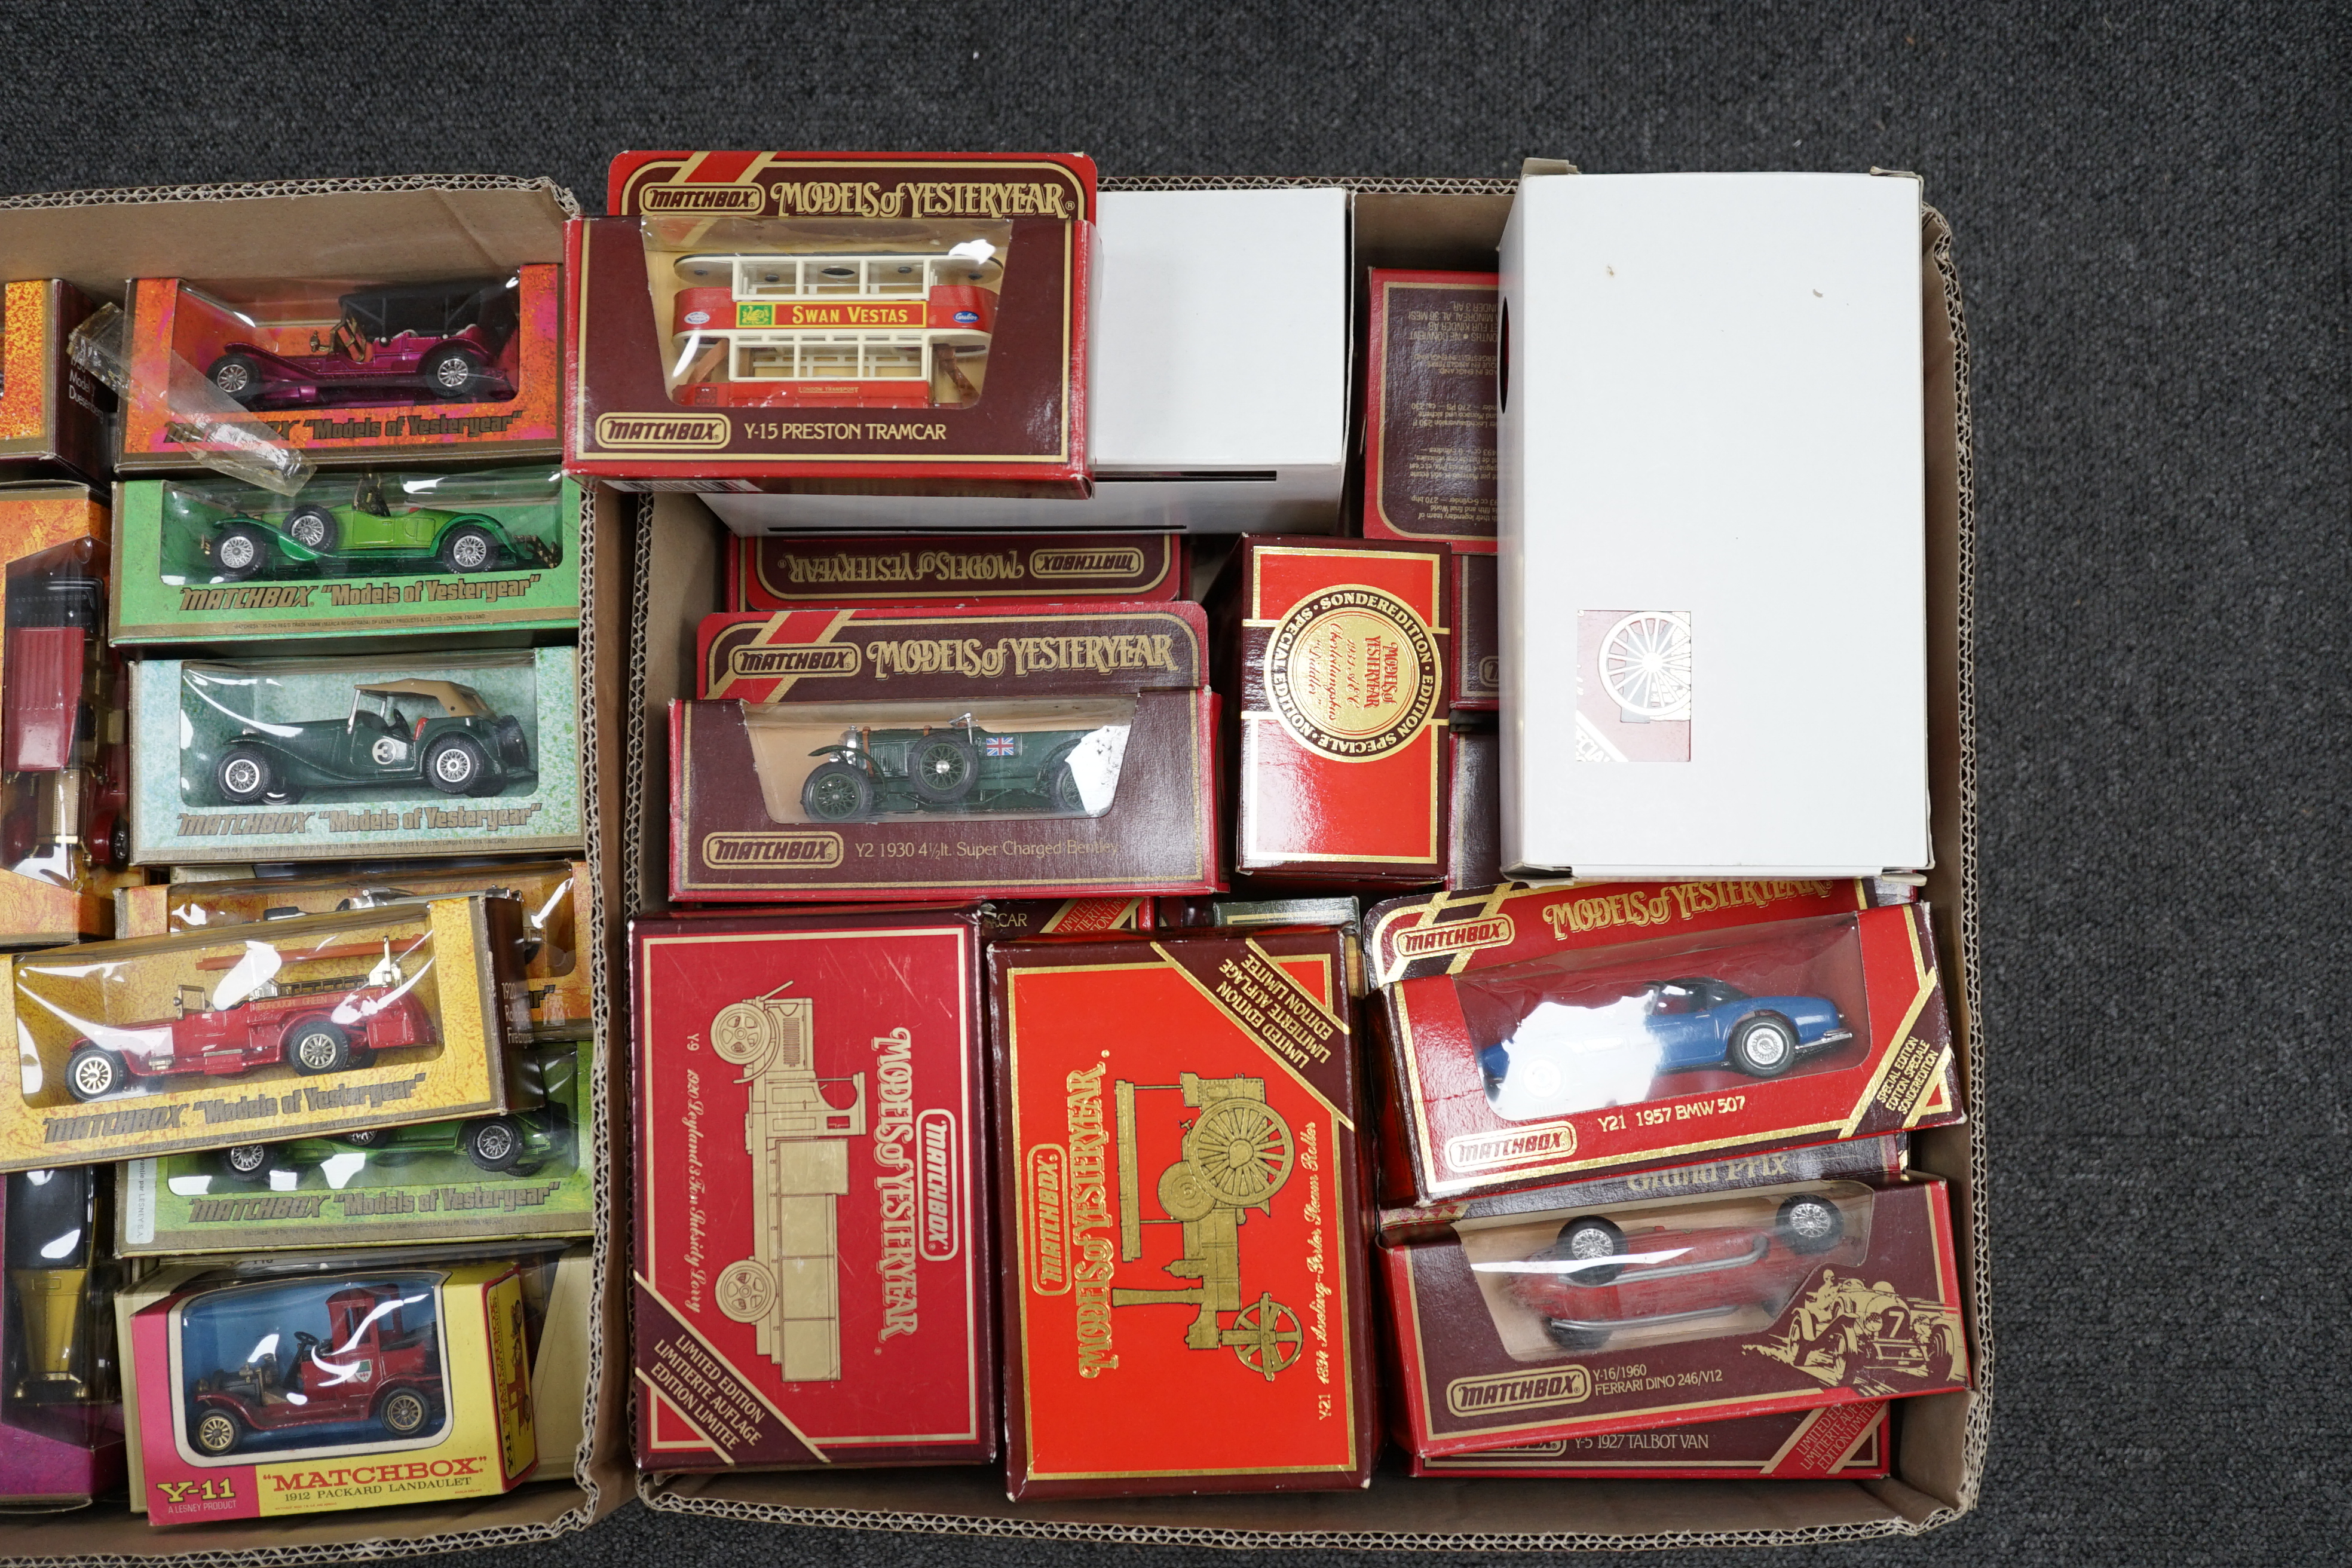 Seventy-nine Matchbox Models of Yesteryear in mainly woodgrain, cream and maroon era boxes, including cars and commercial vehicles